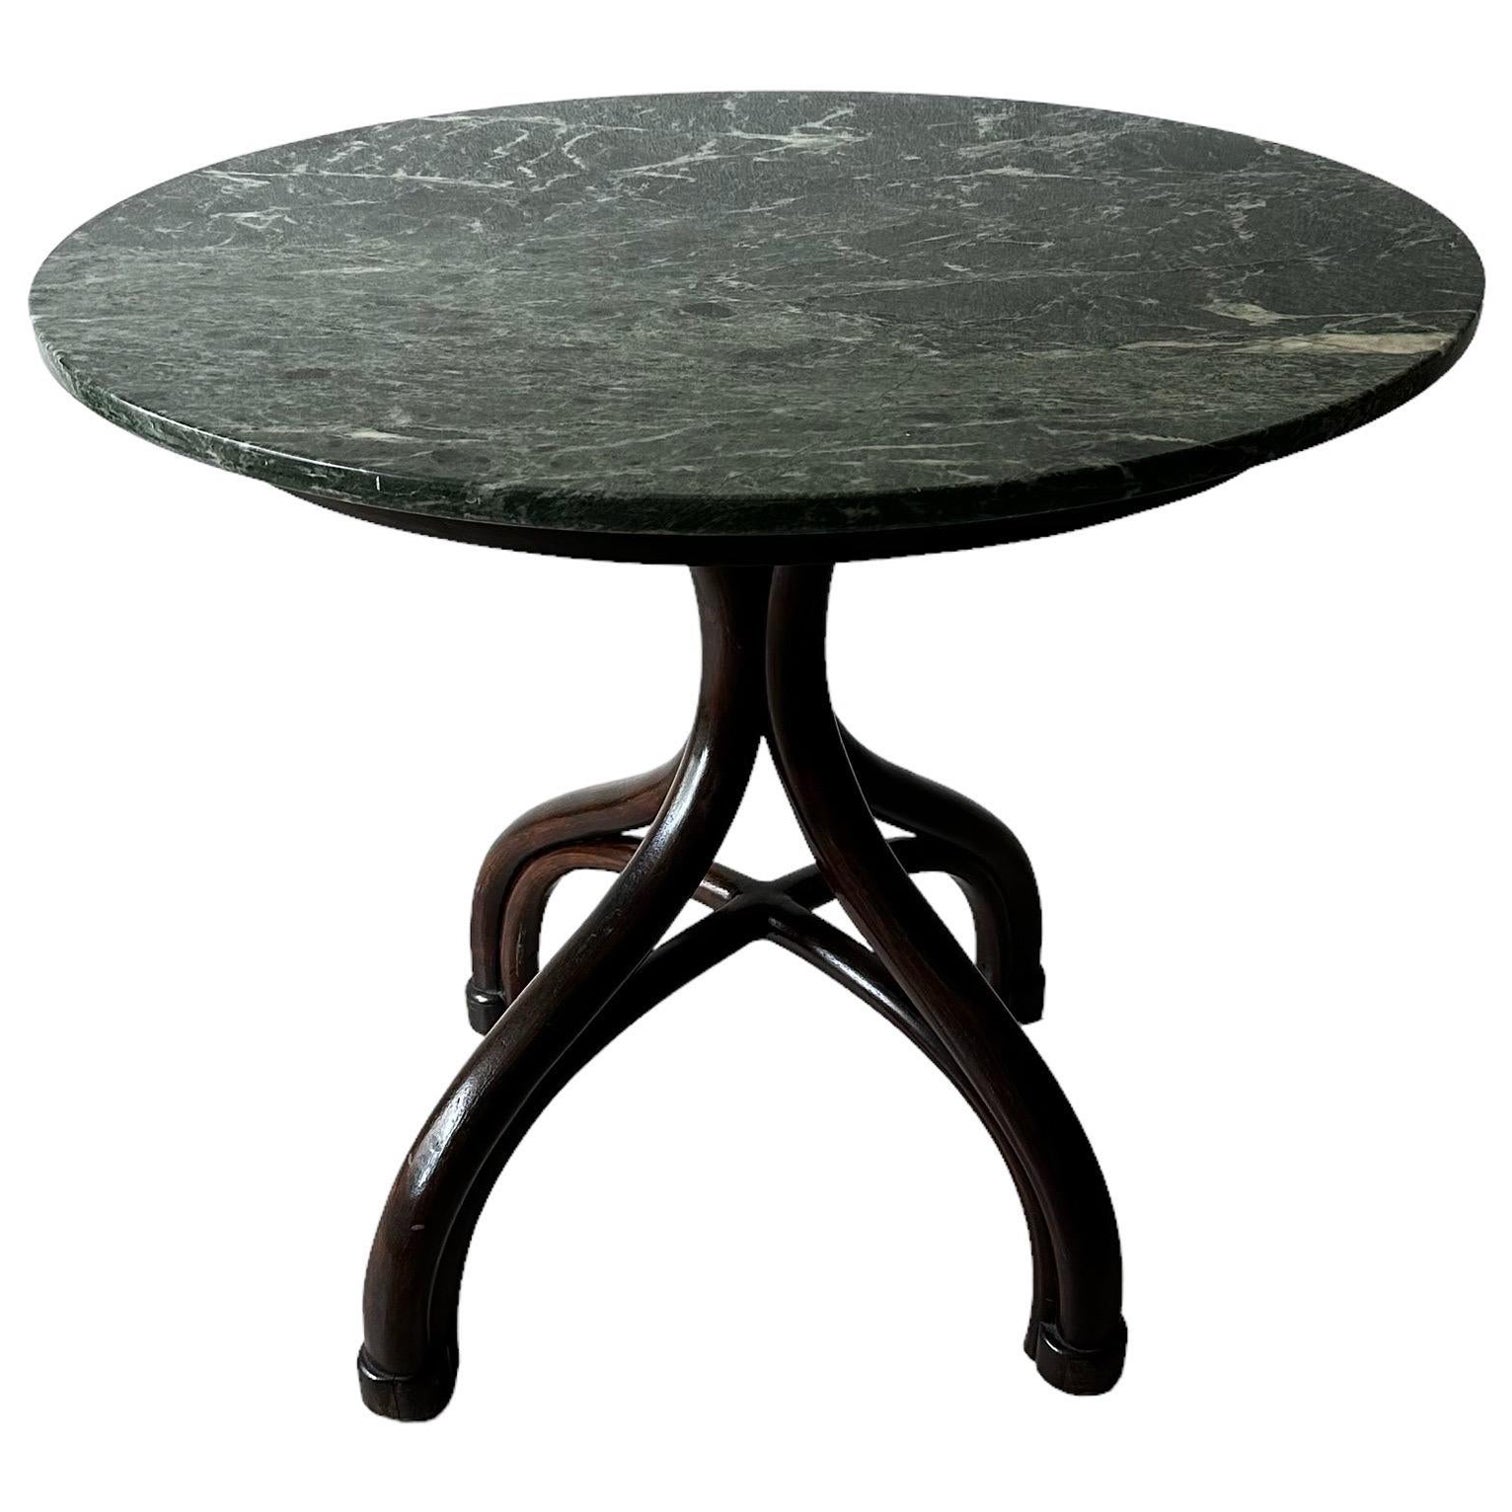 Adolf Loos Cafe Museum Center Hall Table with Green Marble Top, Austria 1910 For Sale